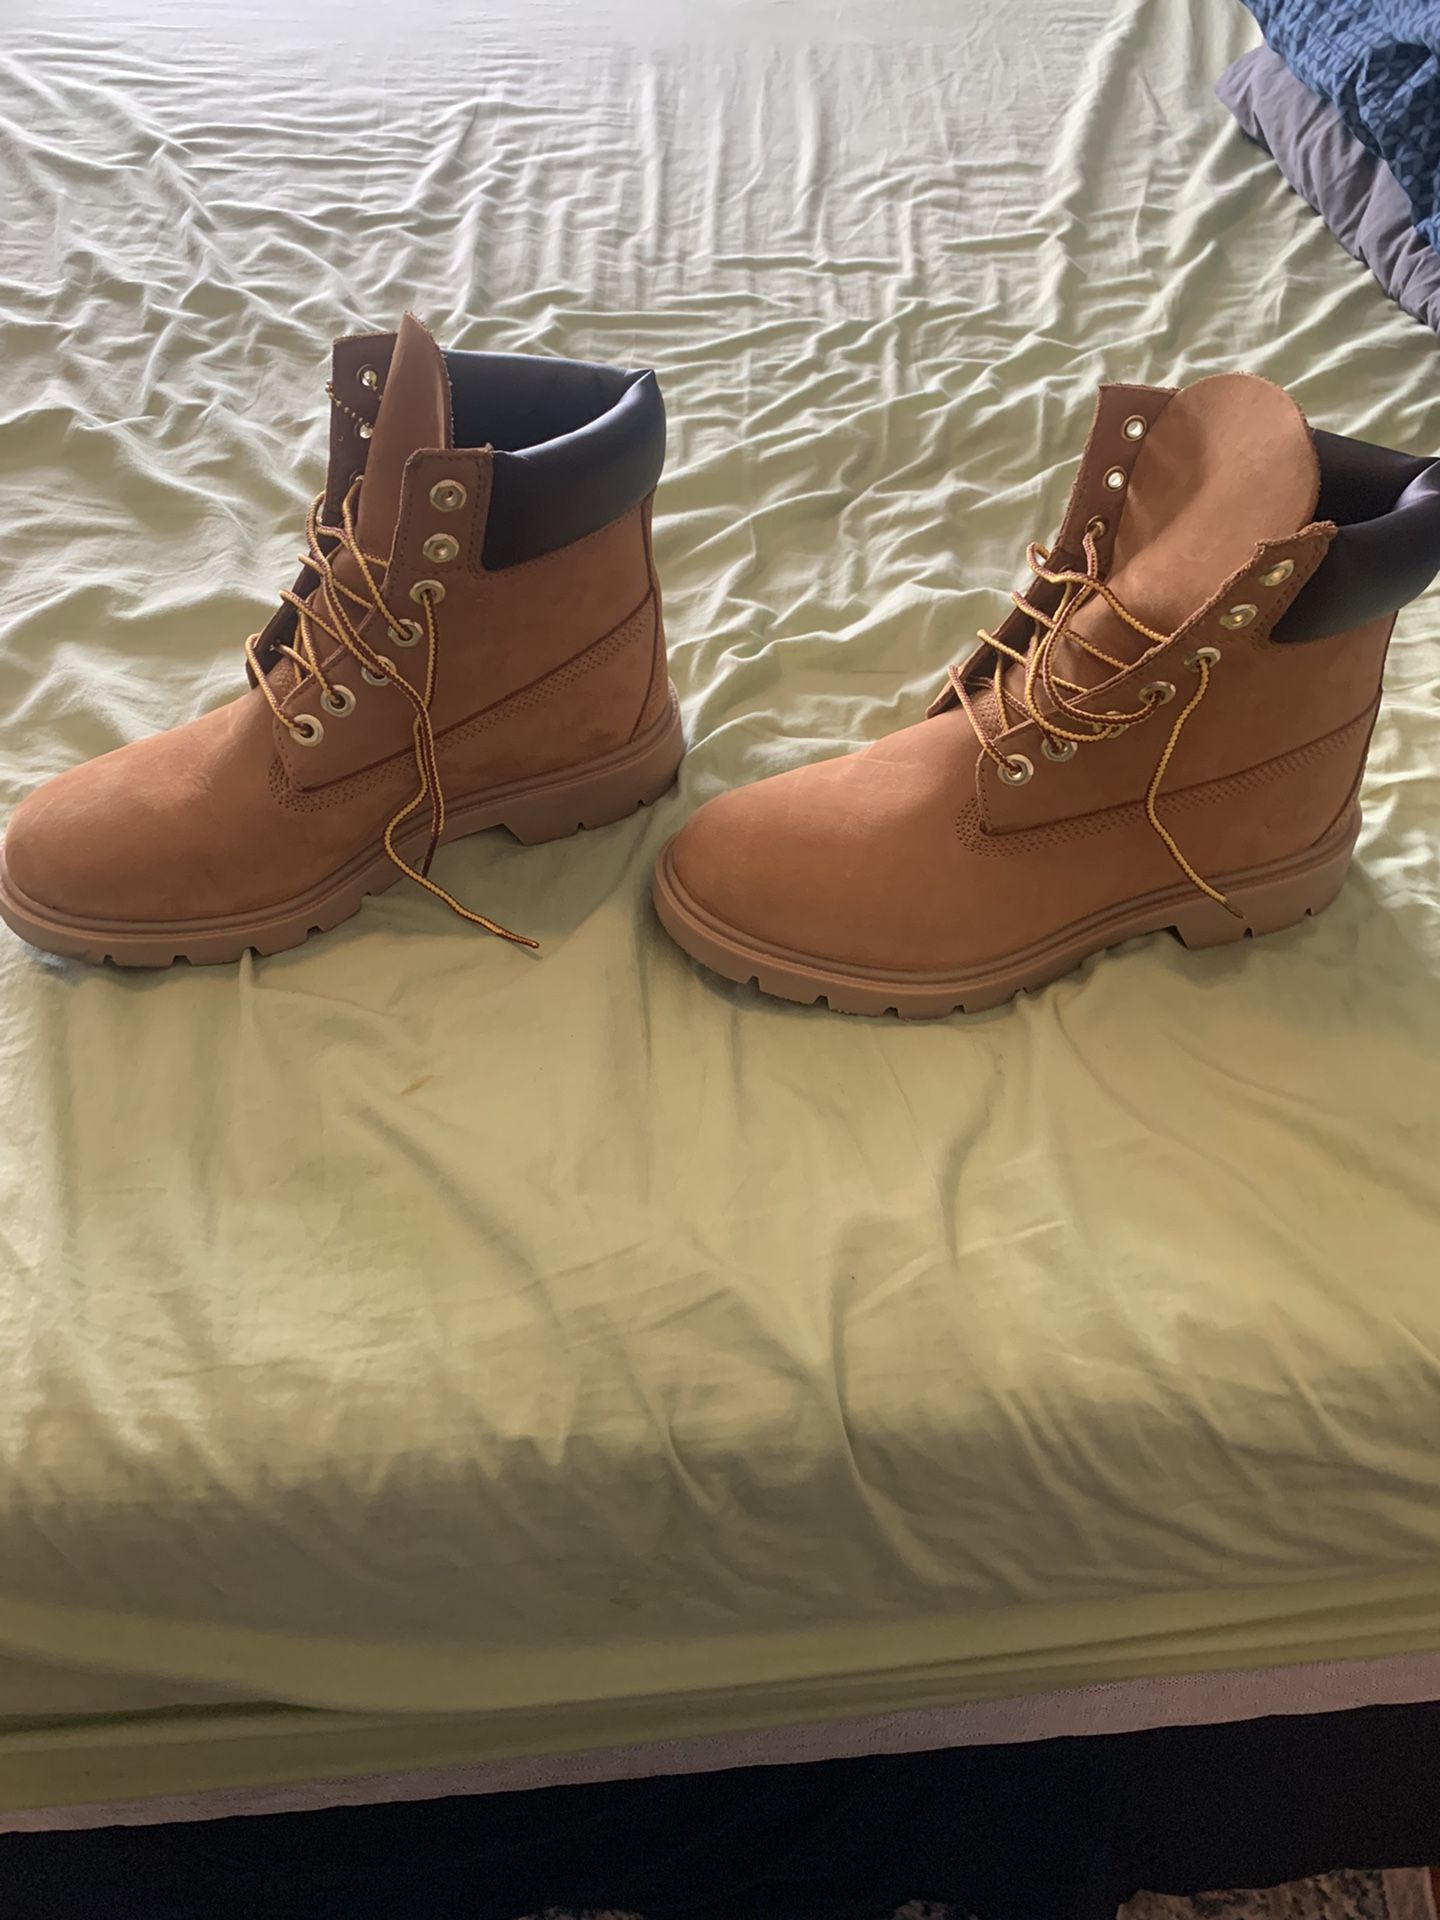 Timberland Boots No More $$180.00 Macy's Price. Give me your best offer.  